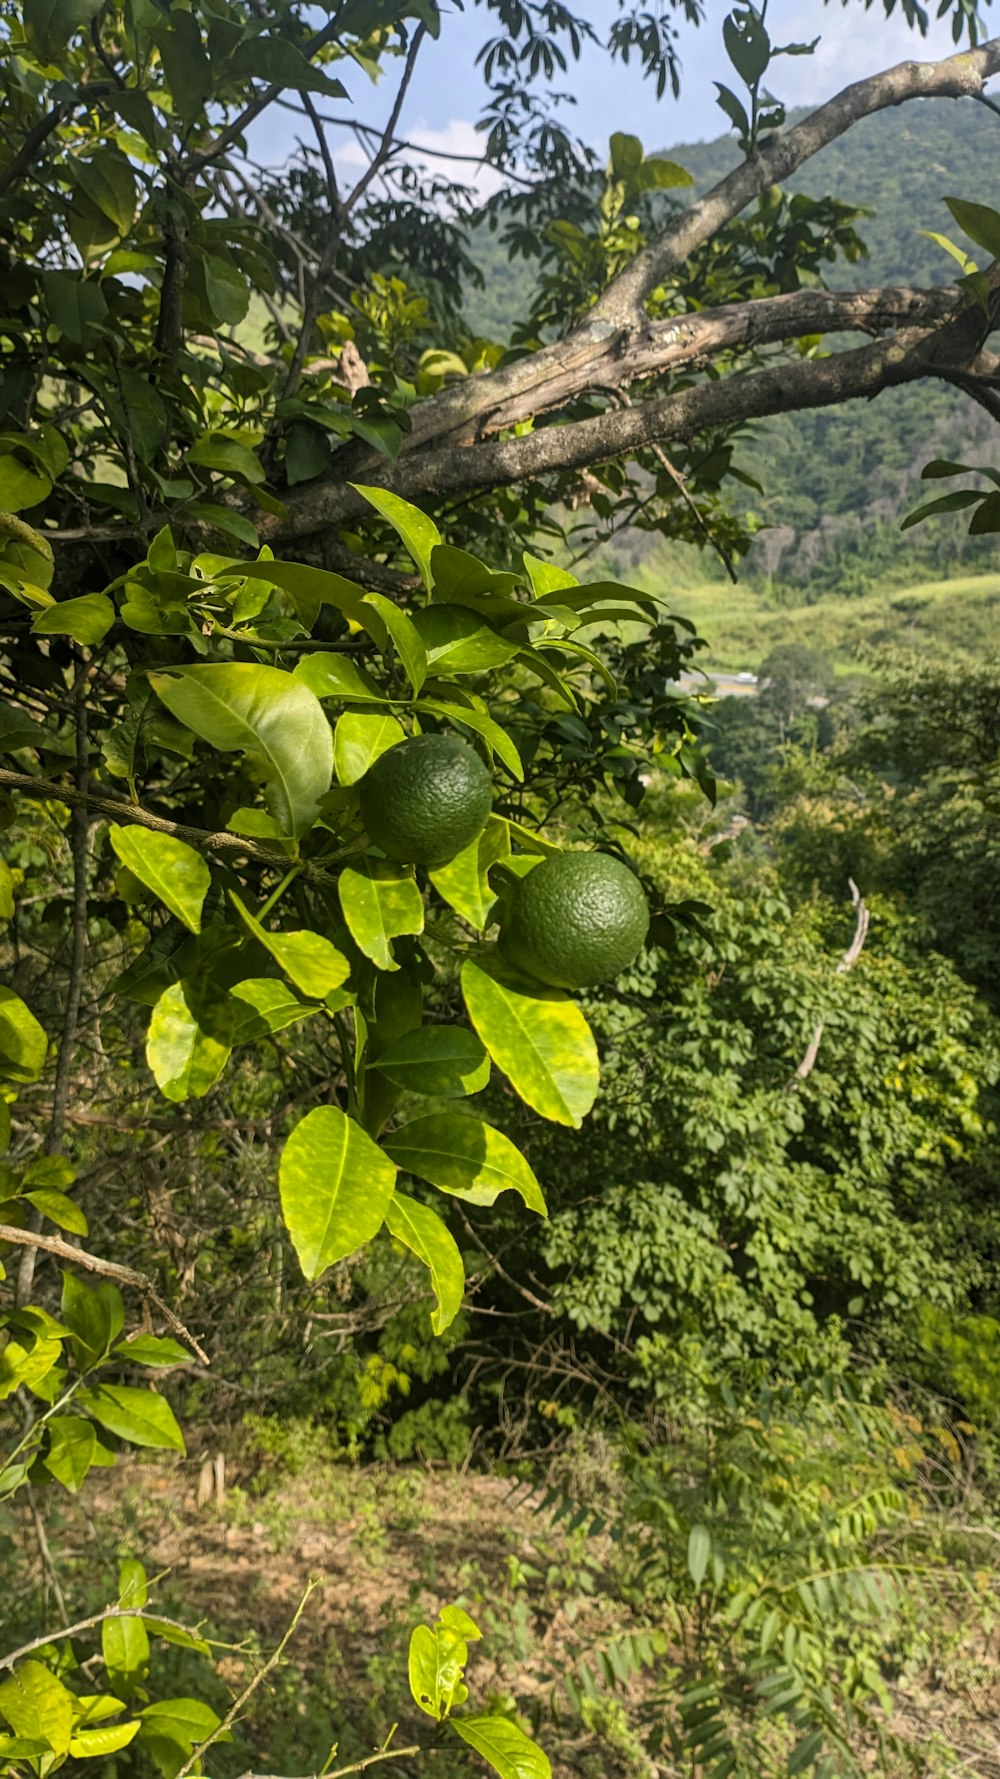 a view of a lush green forest with mountains in the background